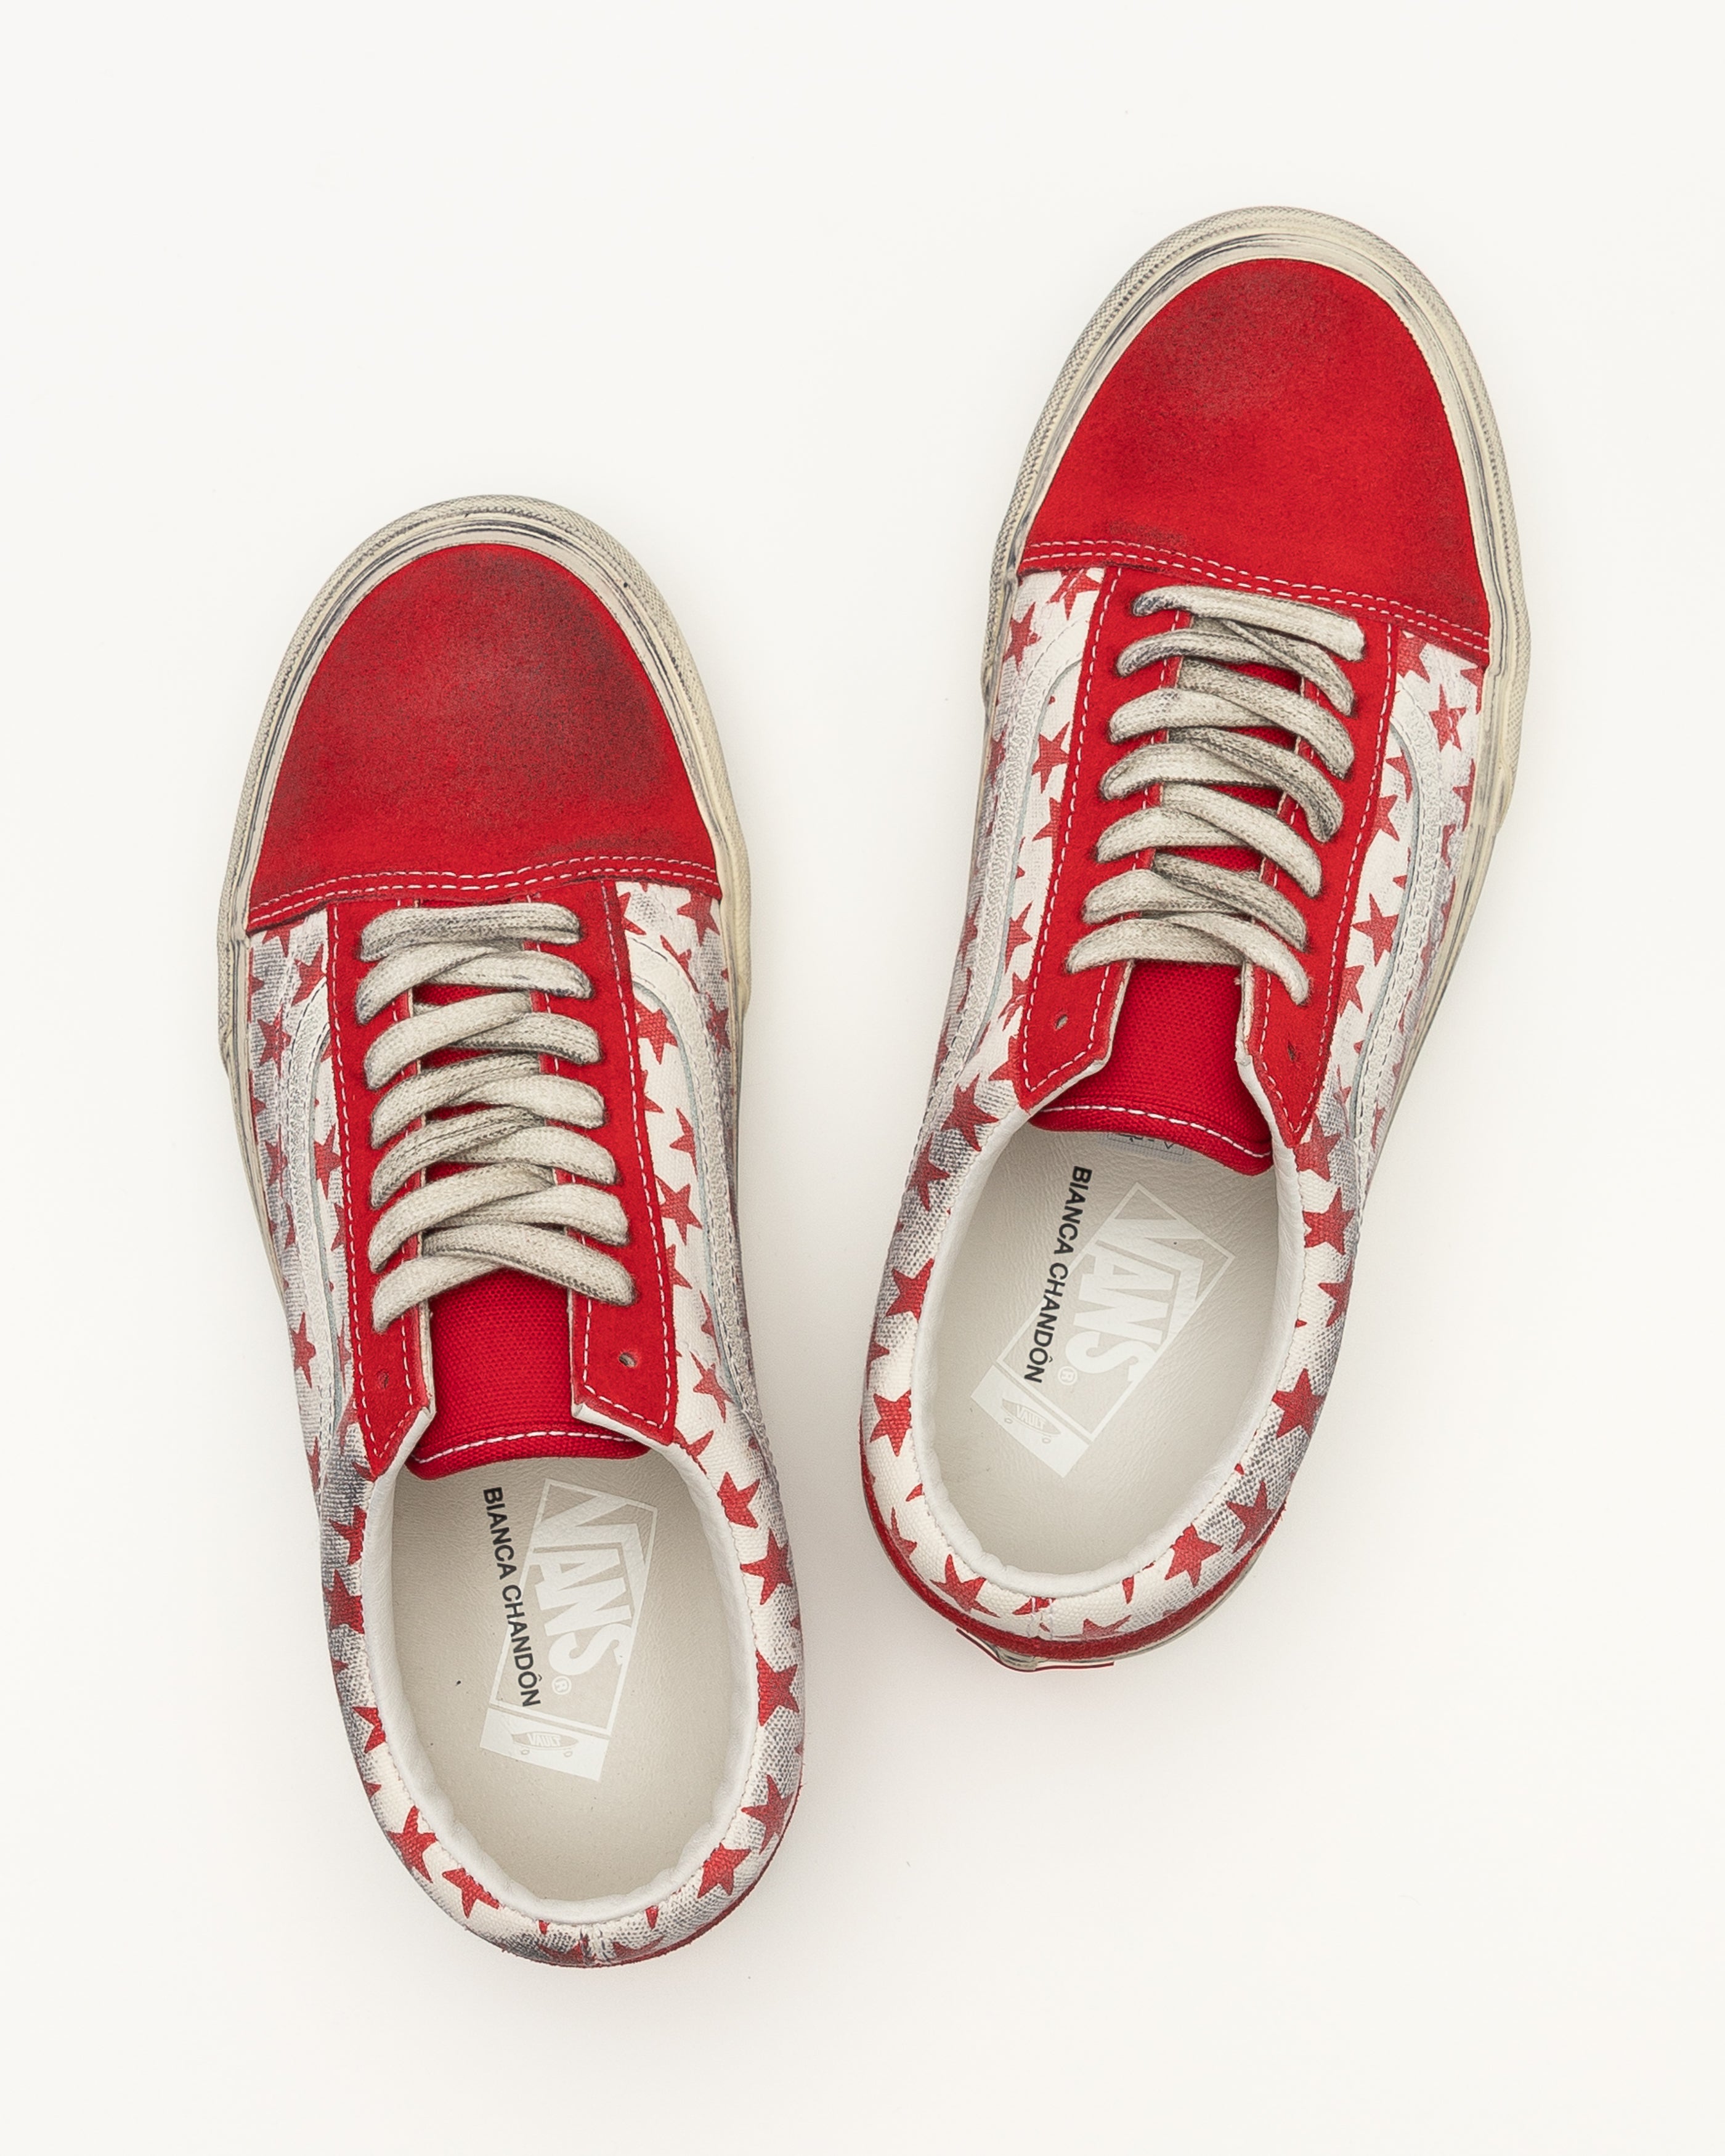 UA Old Skool VLT LX BIANCA CHANDON in Red and White